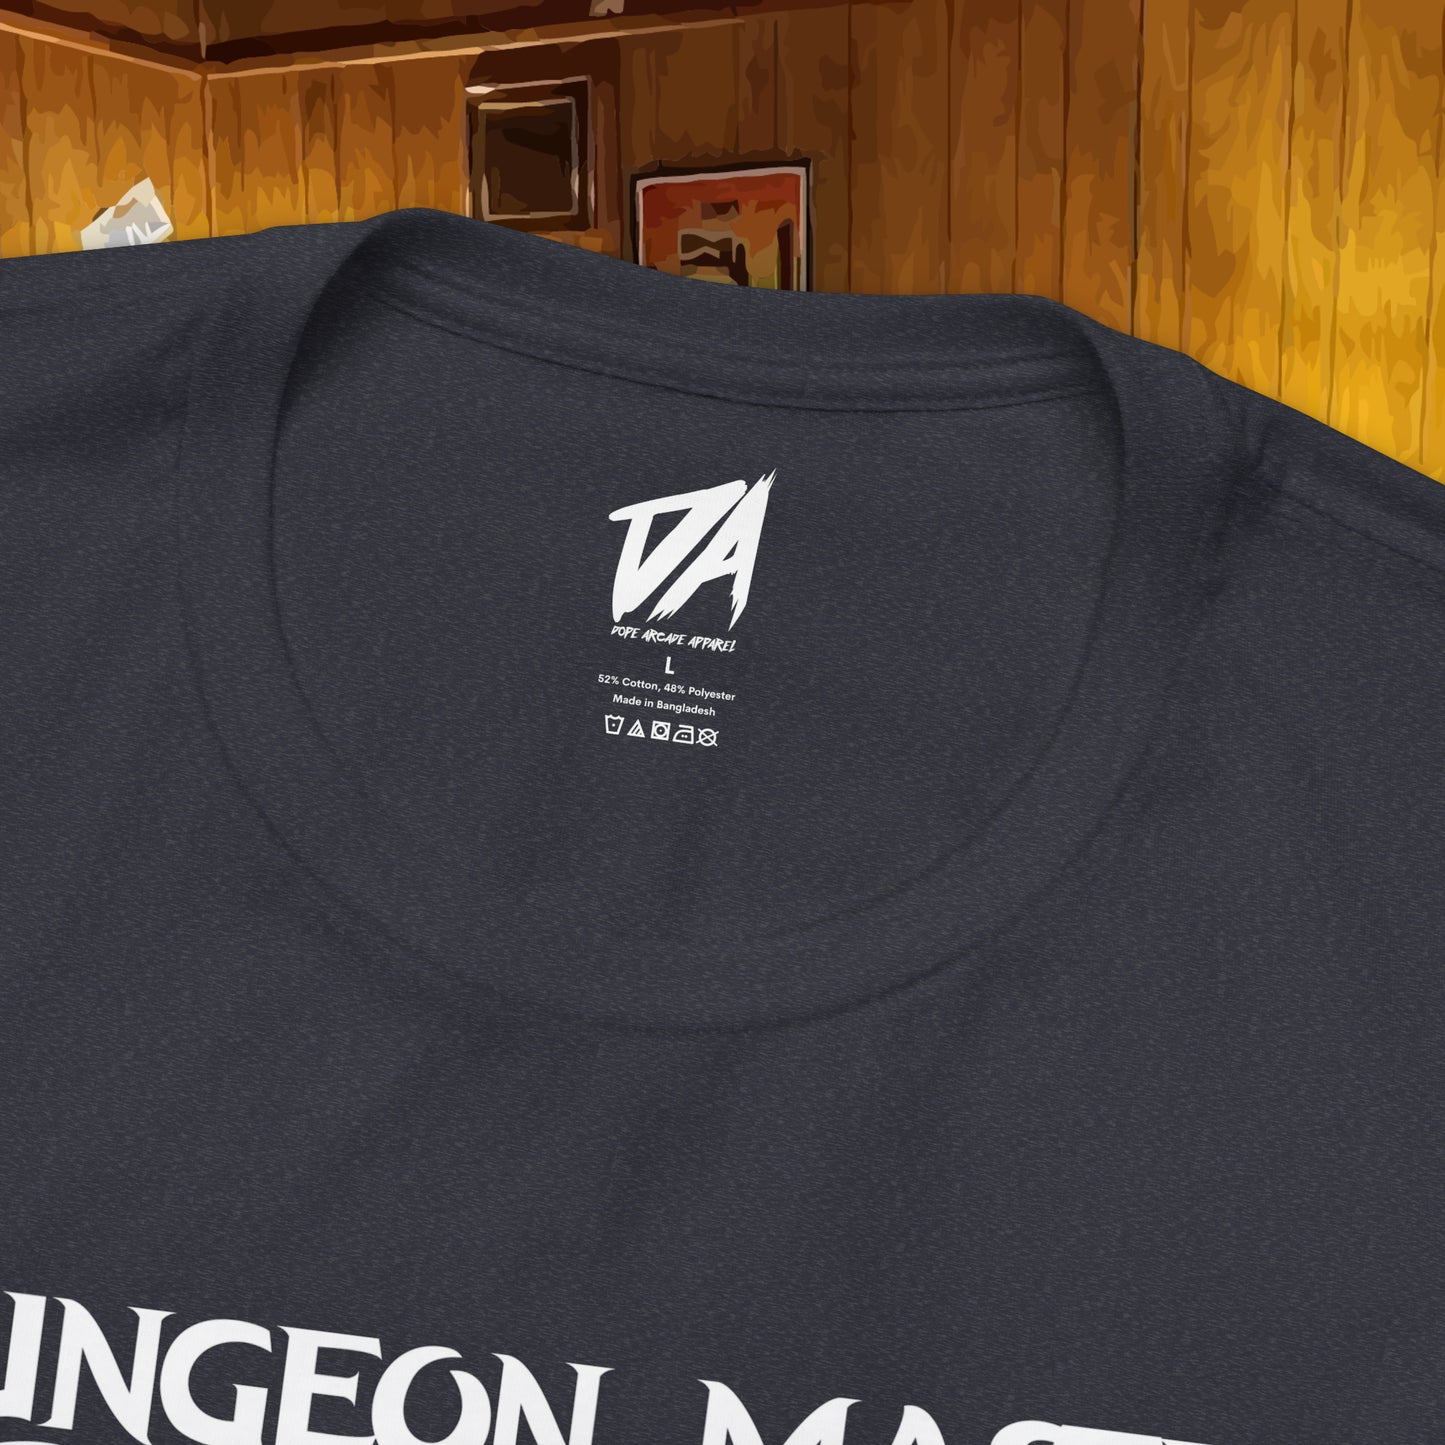 Dungeon Master Class of '94 Tee